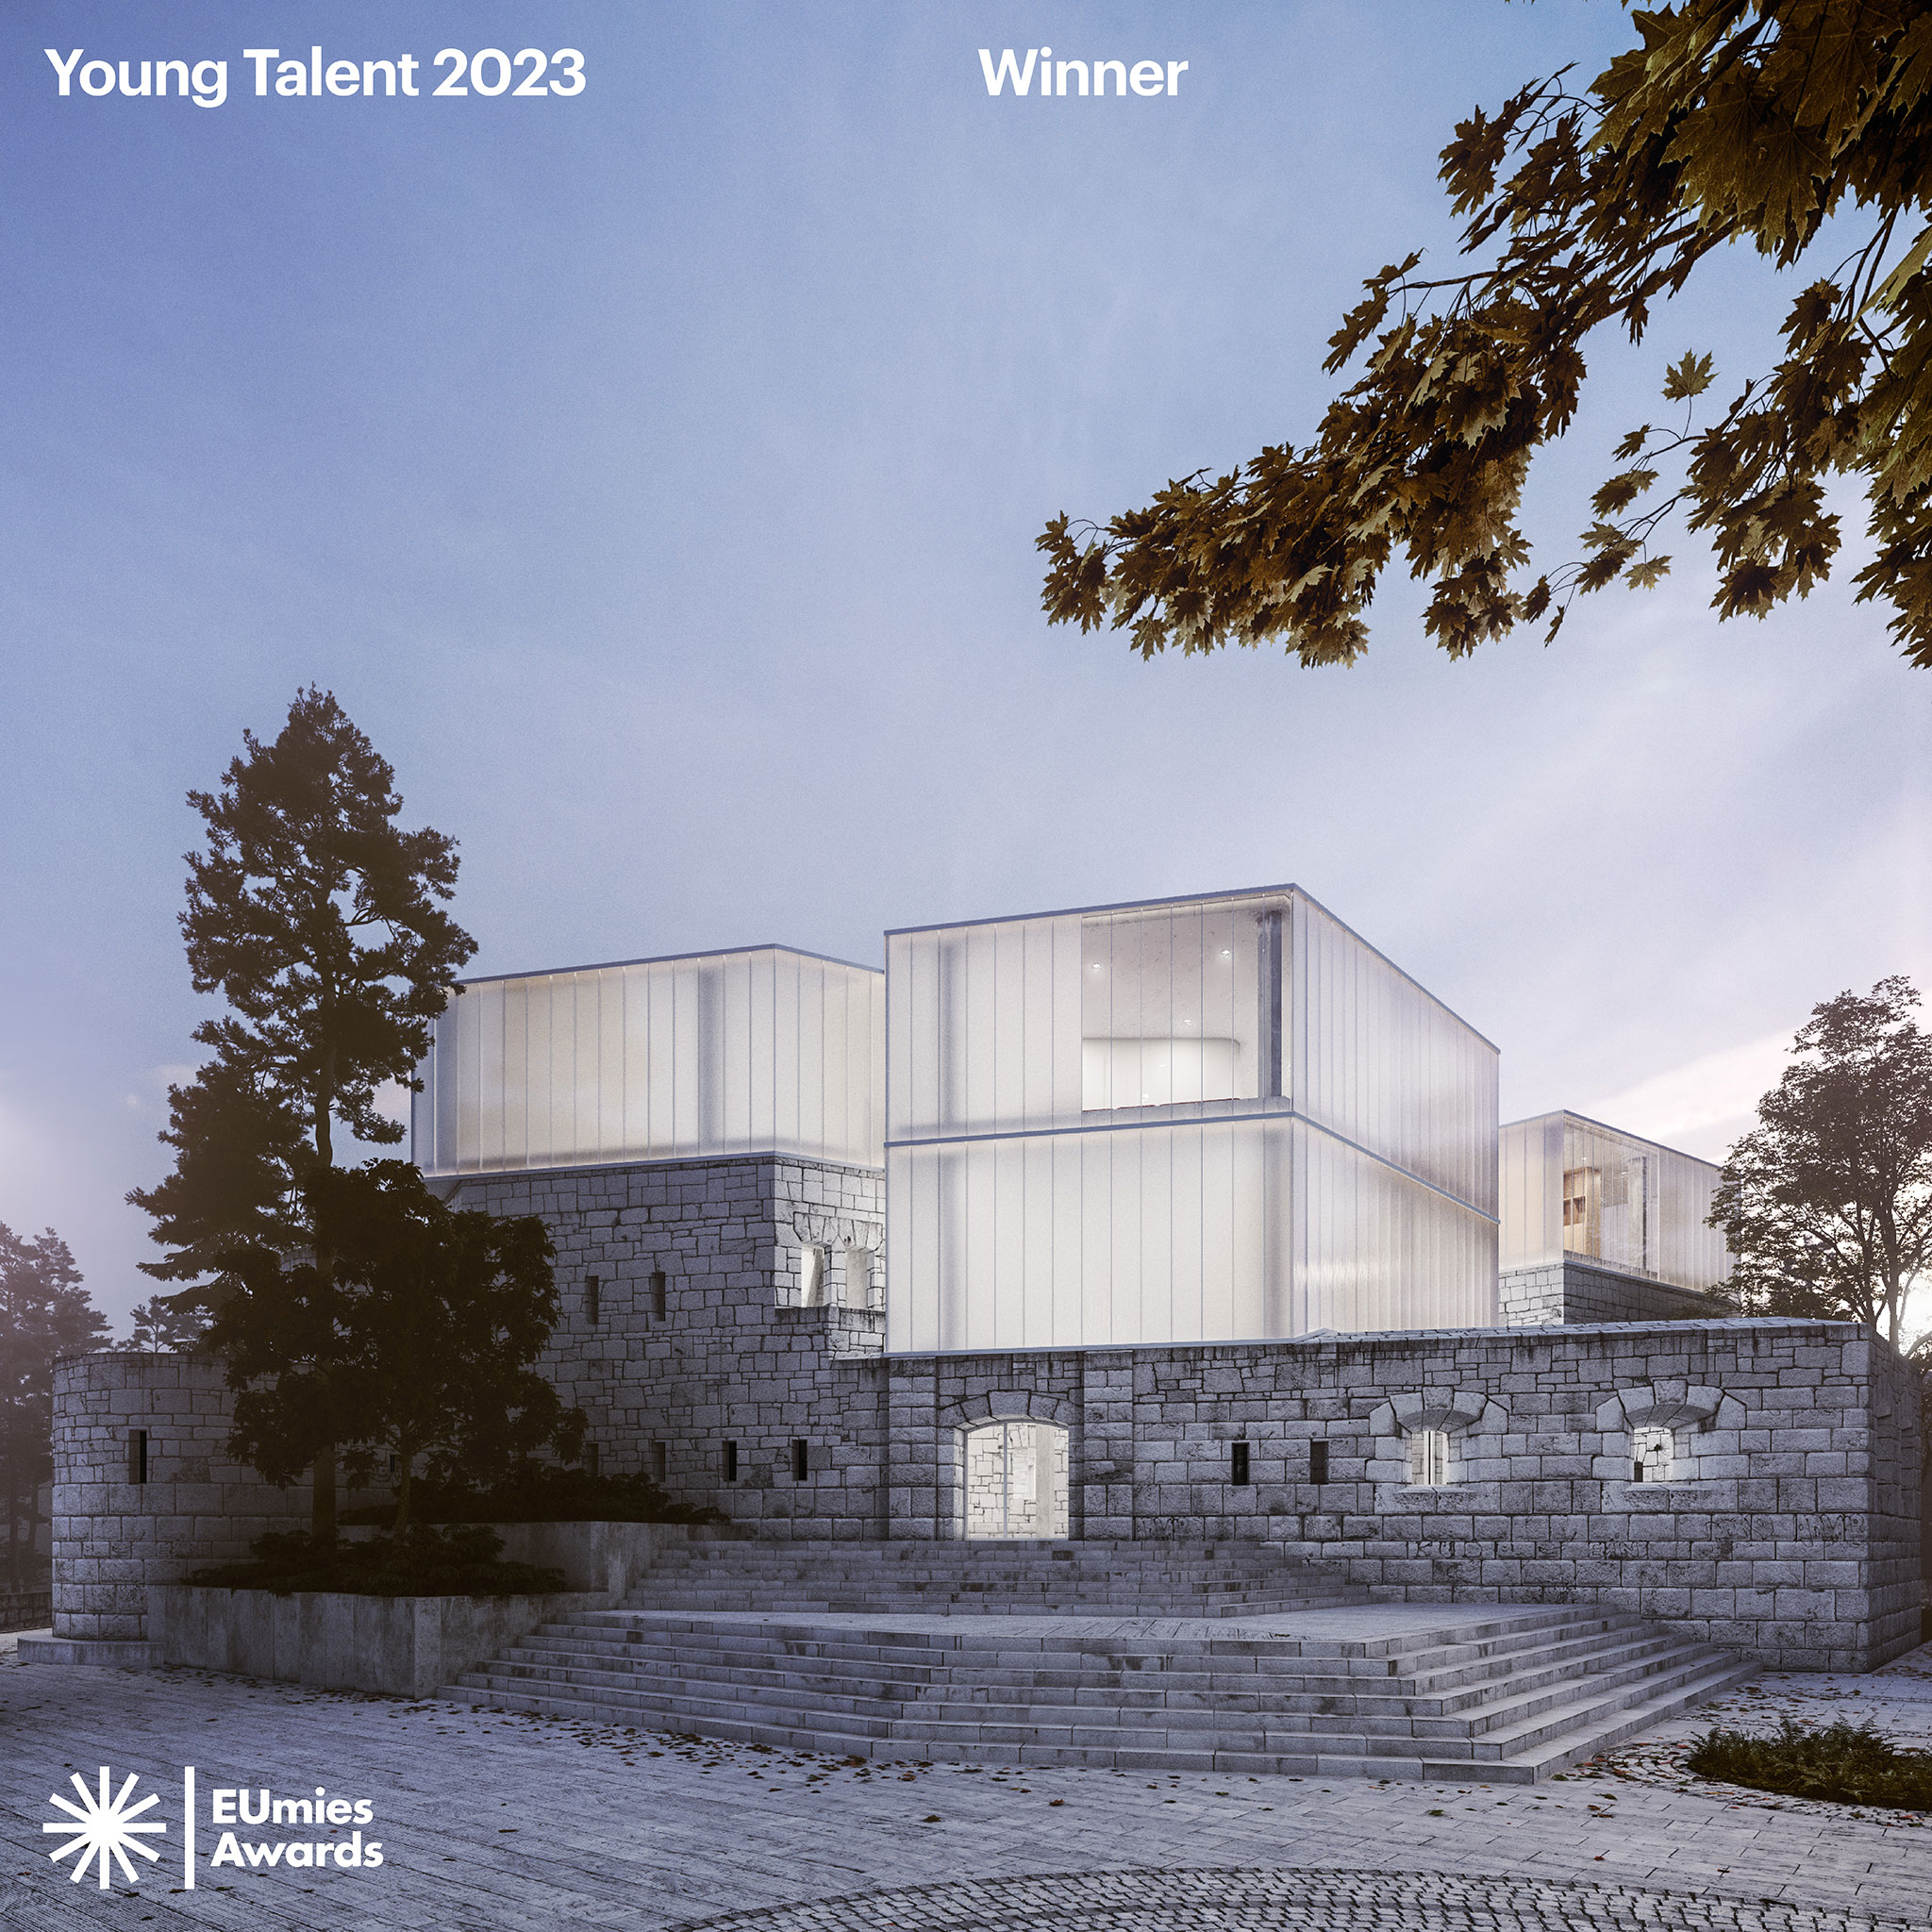 Winners of EUmies Awards, Young Talent 2023. The Laboratory of Education, The Strength of Architecture